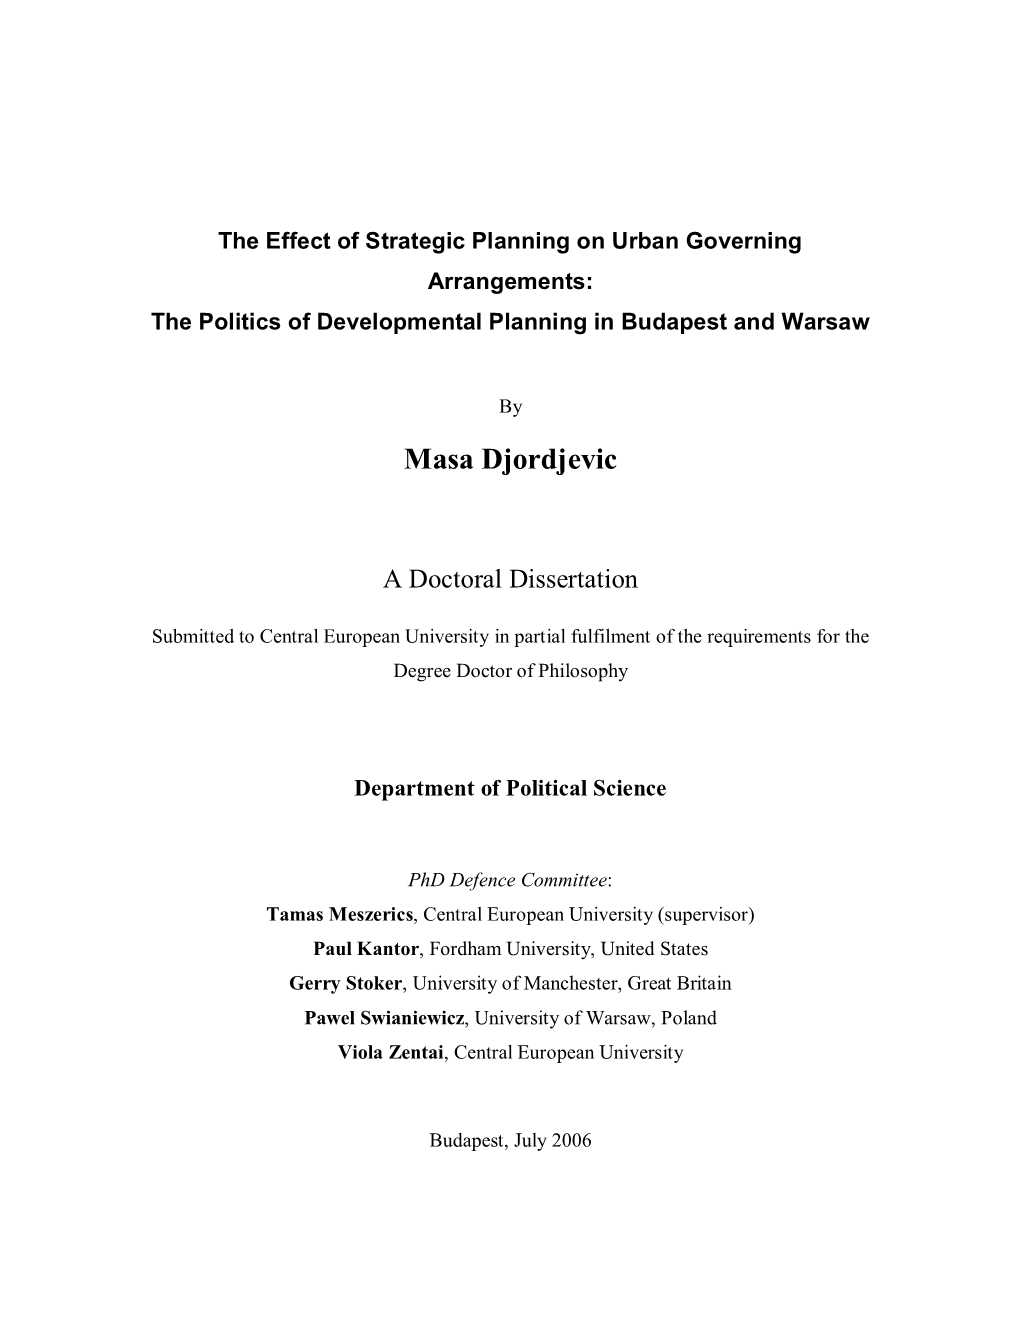 The Effect of Strategic Planning on Urban Governing Arrangements: the Politics of Developmental Planning in Budapest and Warsaw